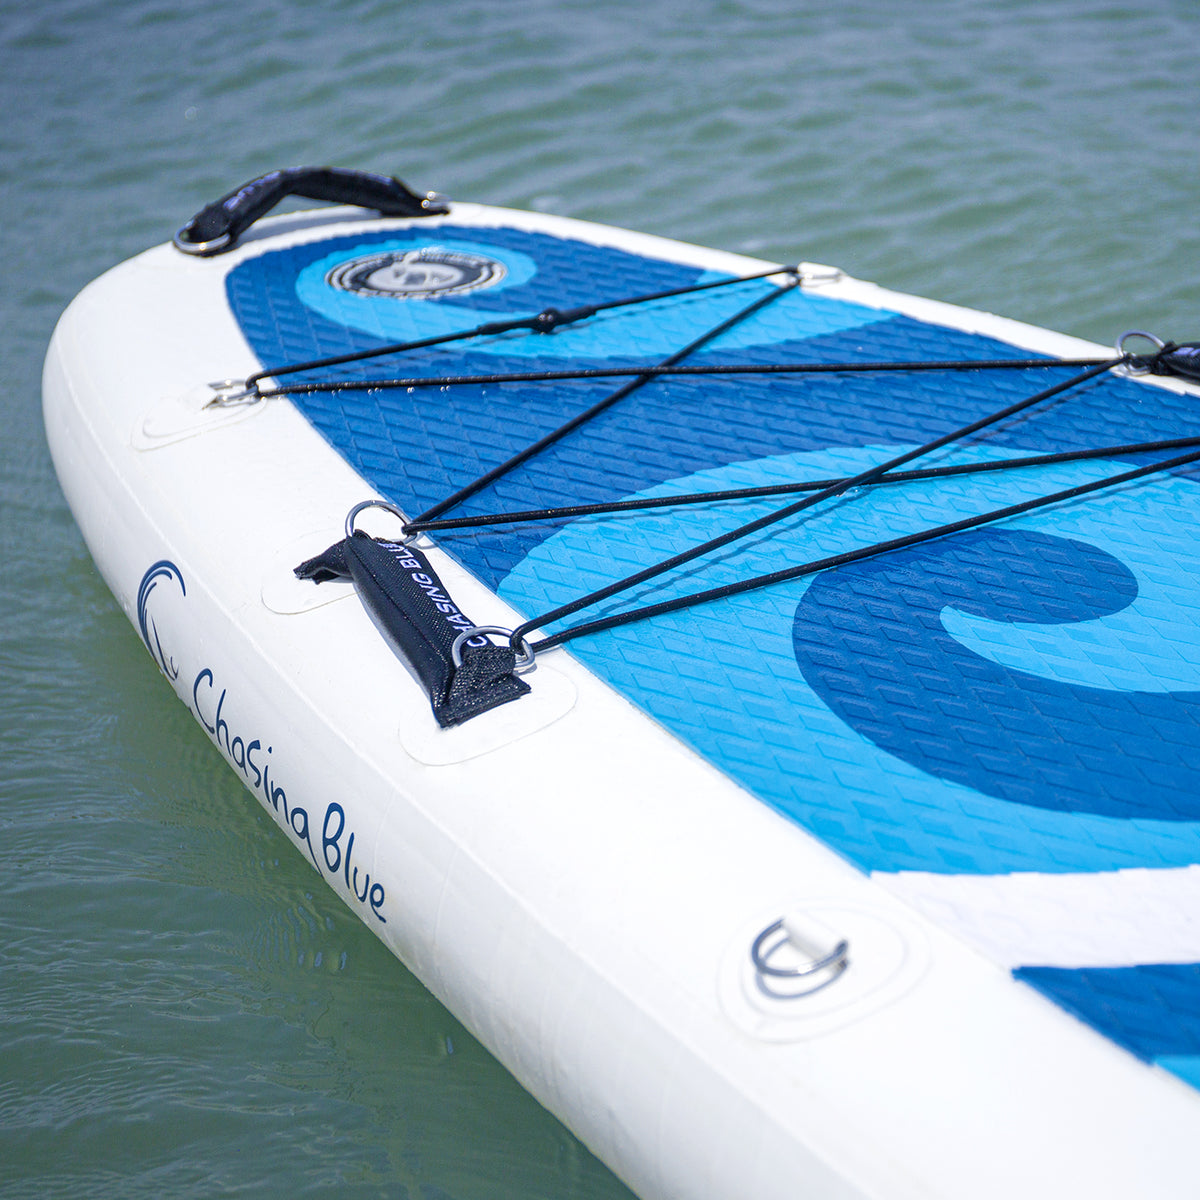 The all-round SUP Aqua Spirit is a perfect beginner SUP Board, offering a m...